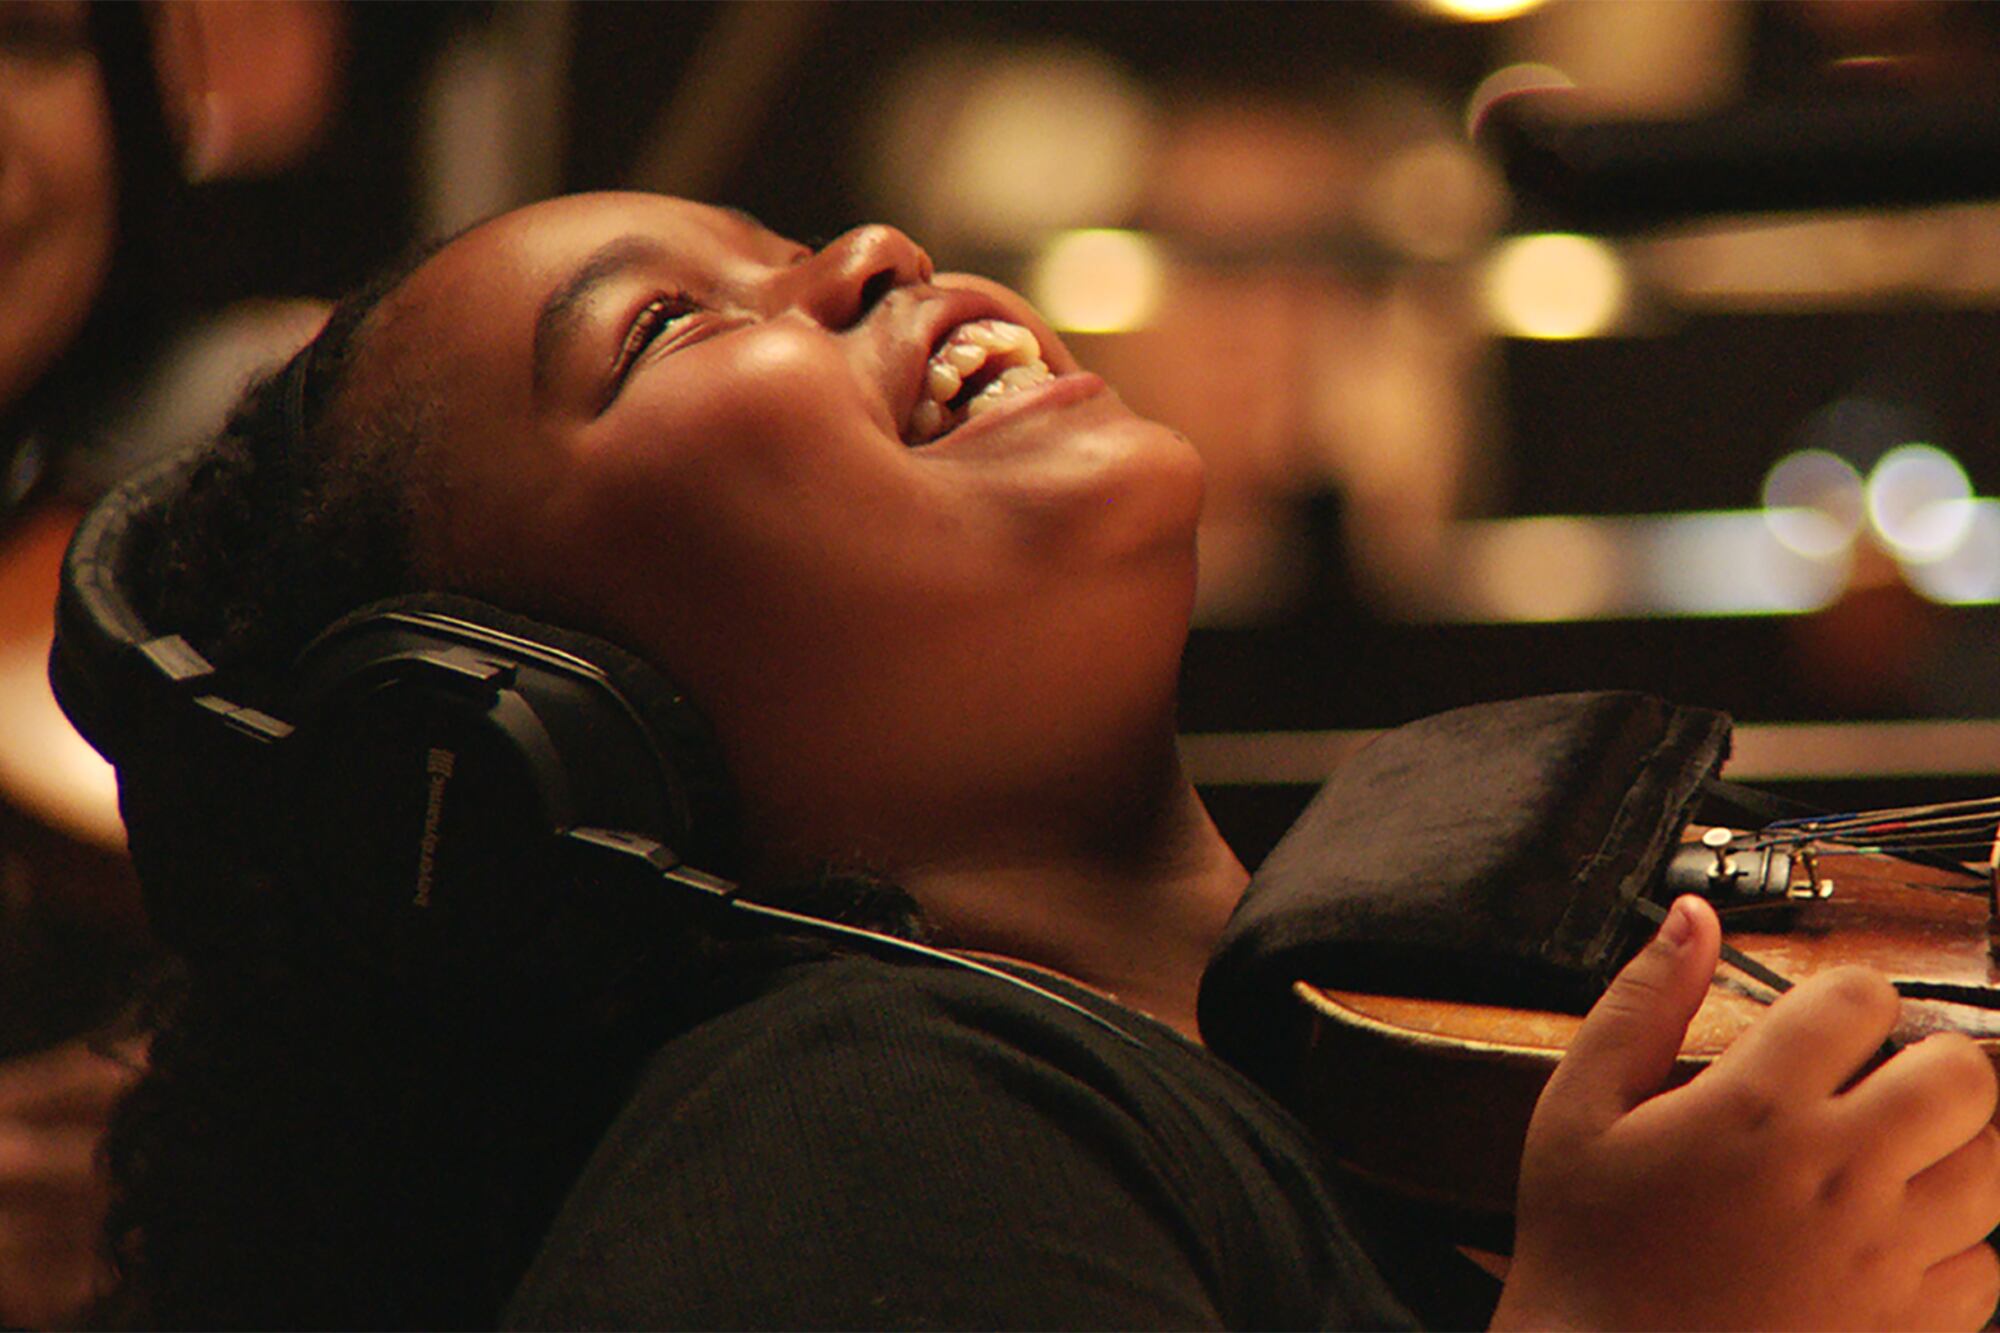 A young girl tilts her head back while she laughs and is holding a violin.